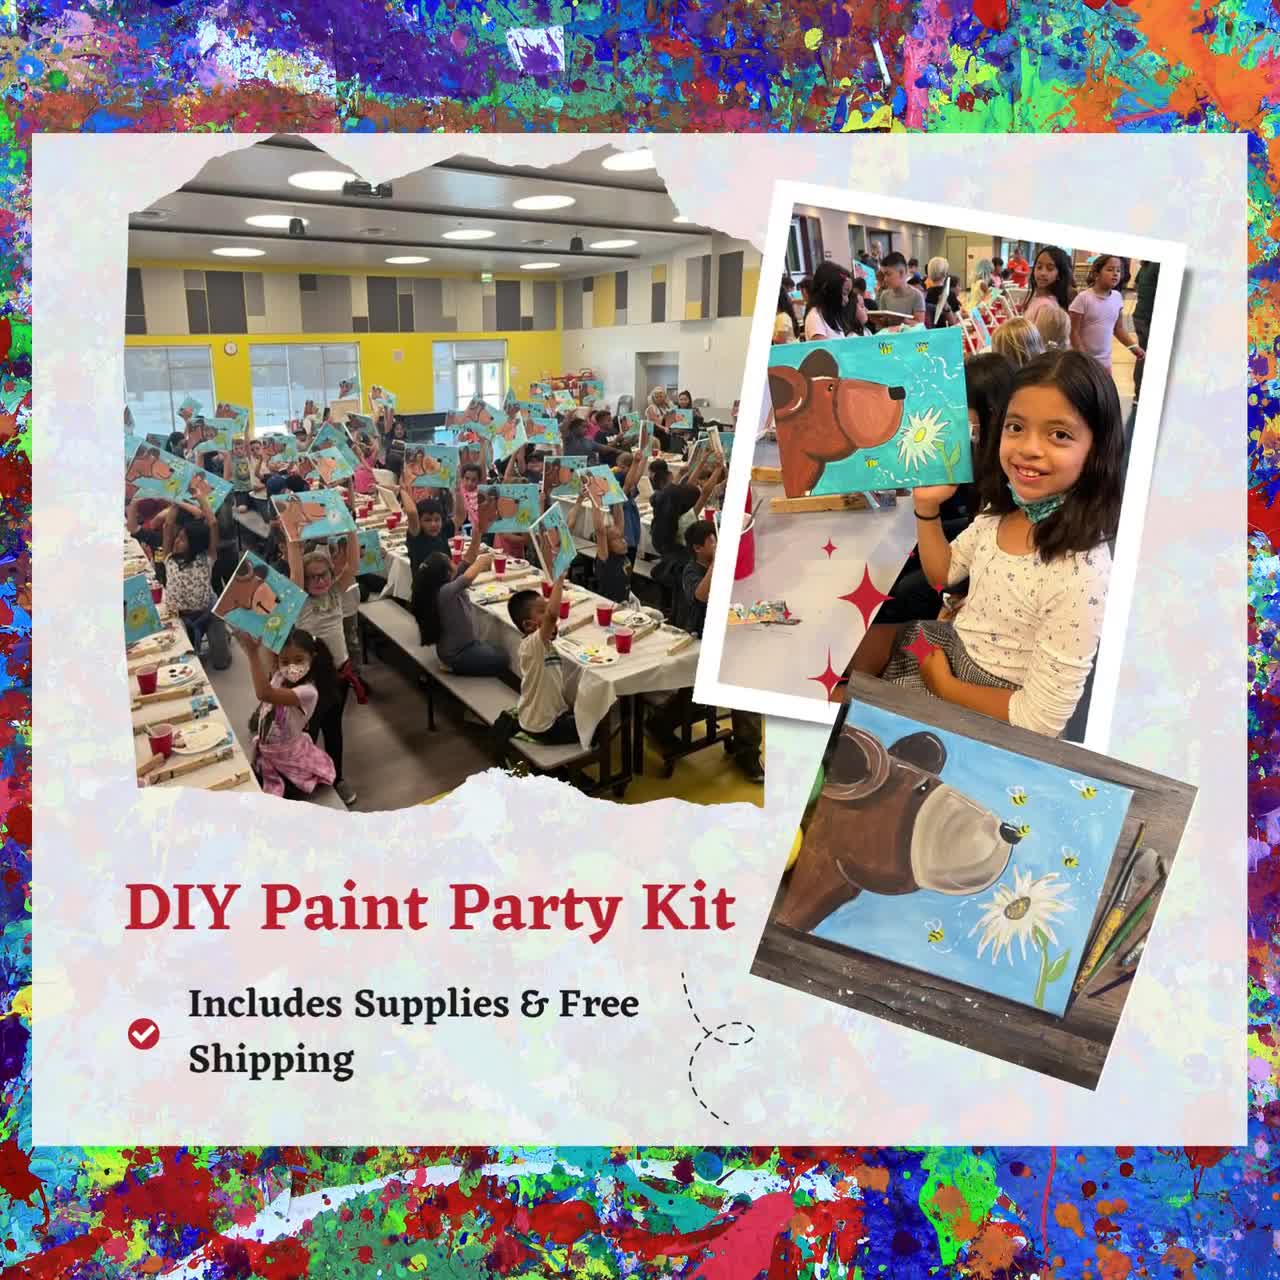 Honey Bear DIY Paint Art Party Kit-Includes ALL Supplies with Video  Tutorial and Free Shipping makes the perfect gift or DIY Paint Party!